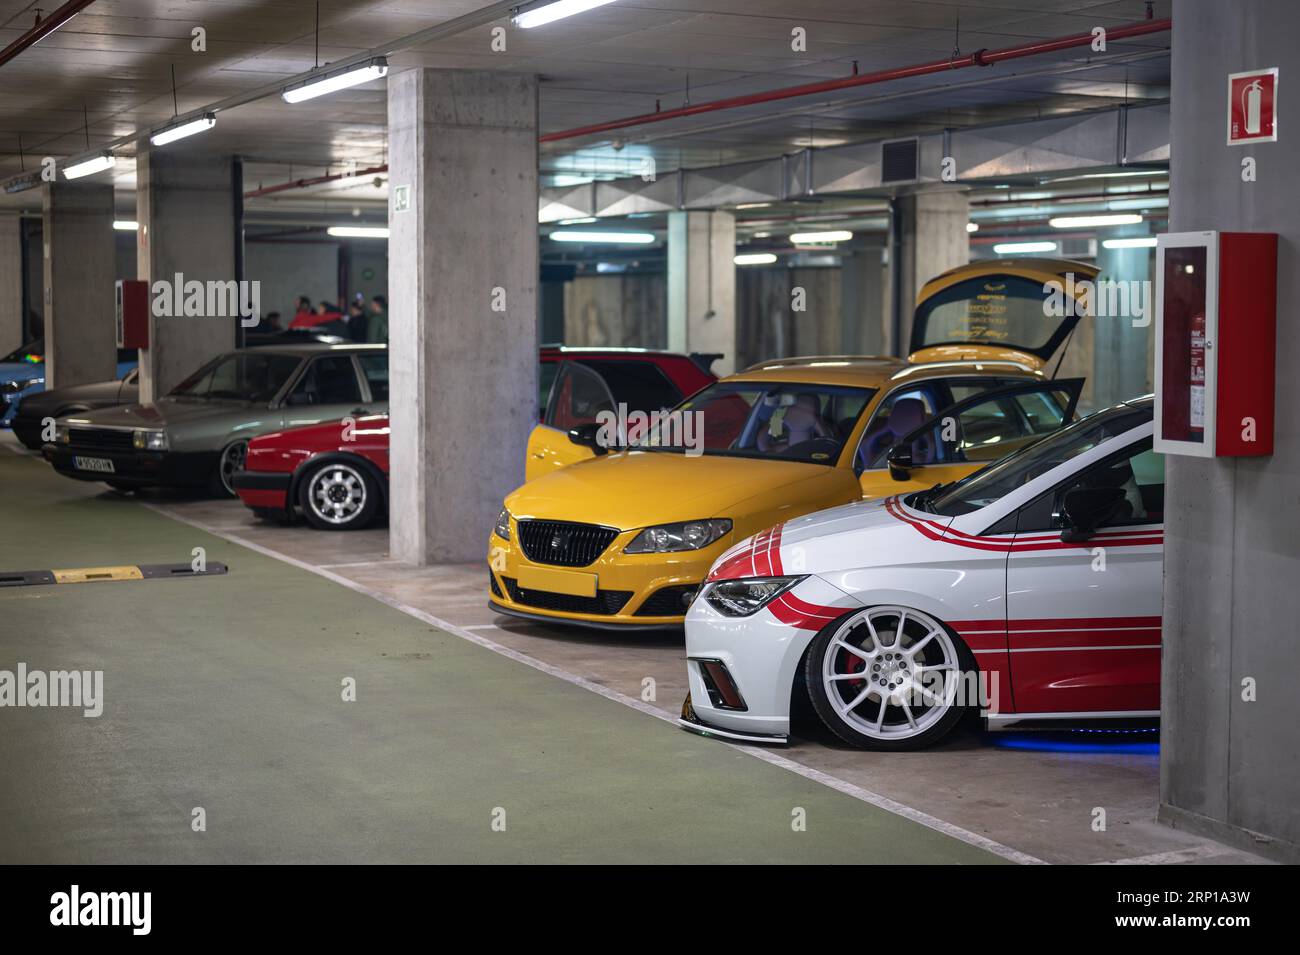 A meeting of tuned Spanish cars in a garage Stock Photo